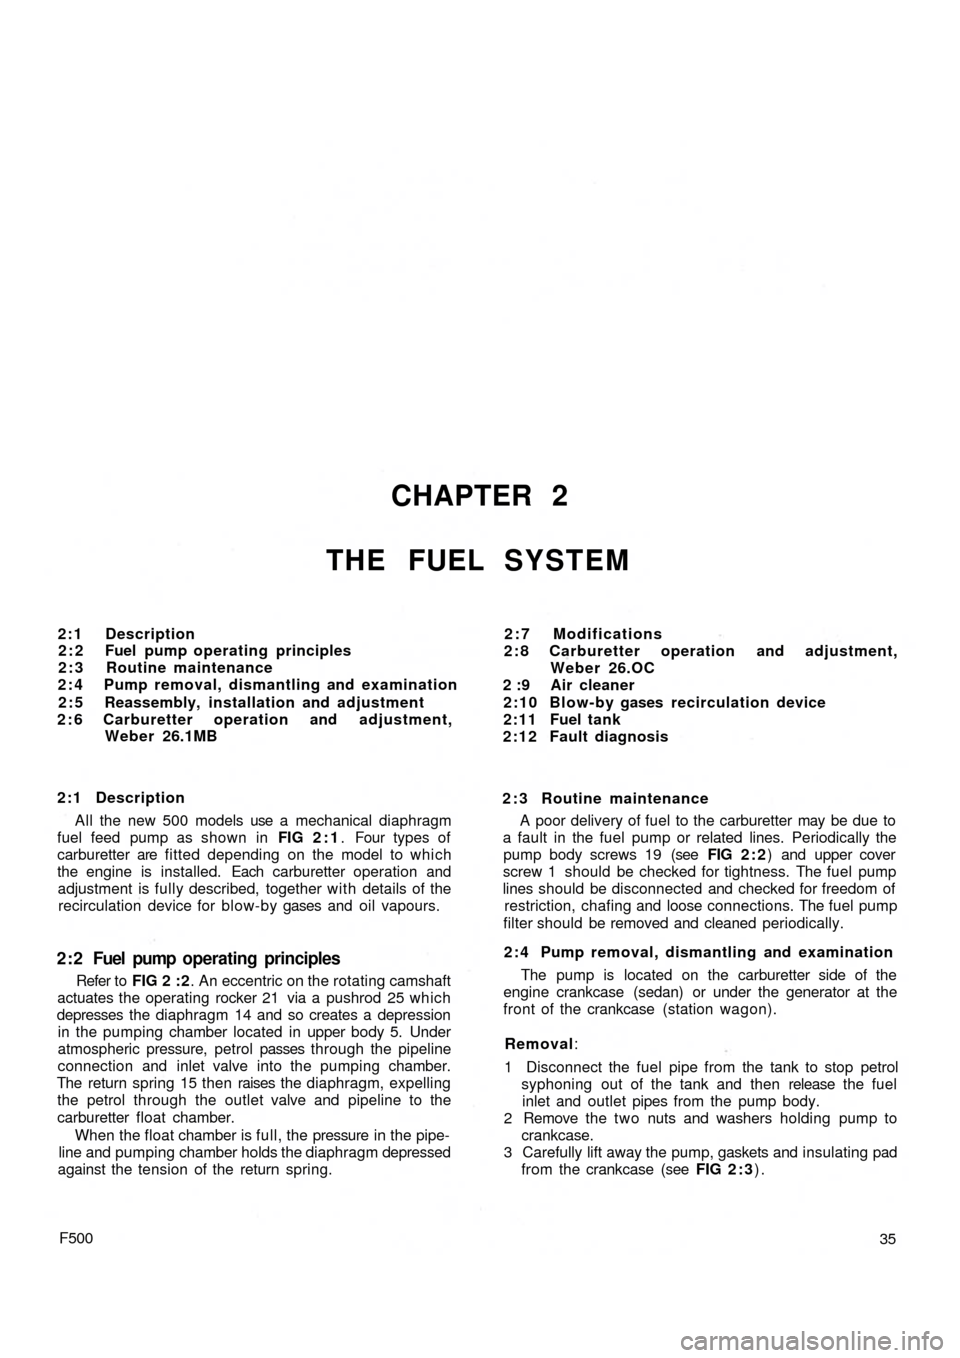 FIAT 500 1964 1.G Workshop Manual CHAPTER 2
THE FUEL SYSTEM
2:1 Description
2 : 2 Fuel pump operating principles
2 : 3 Routine maintenance
2 : 4 Pump removal, dismantling and examination
2 : 5 Reassembly, installation and adjustment
2